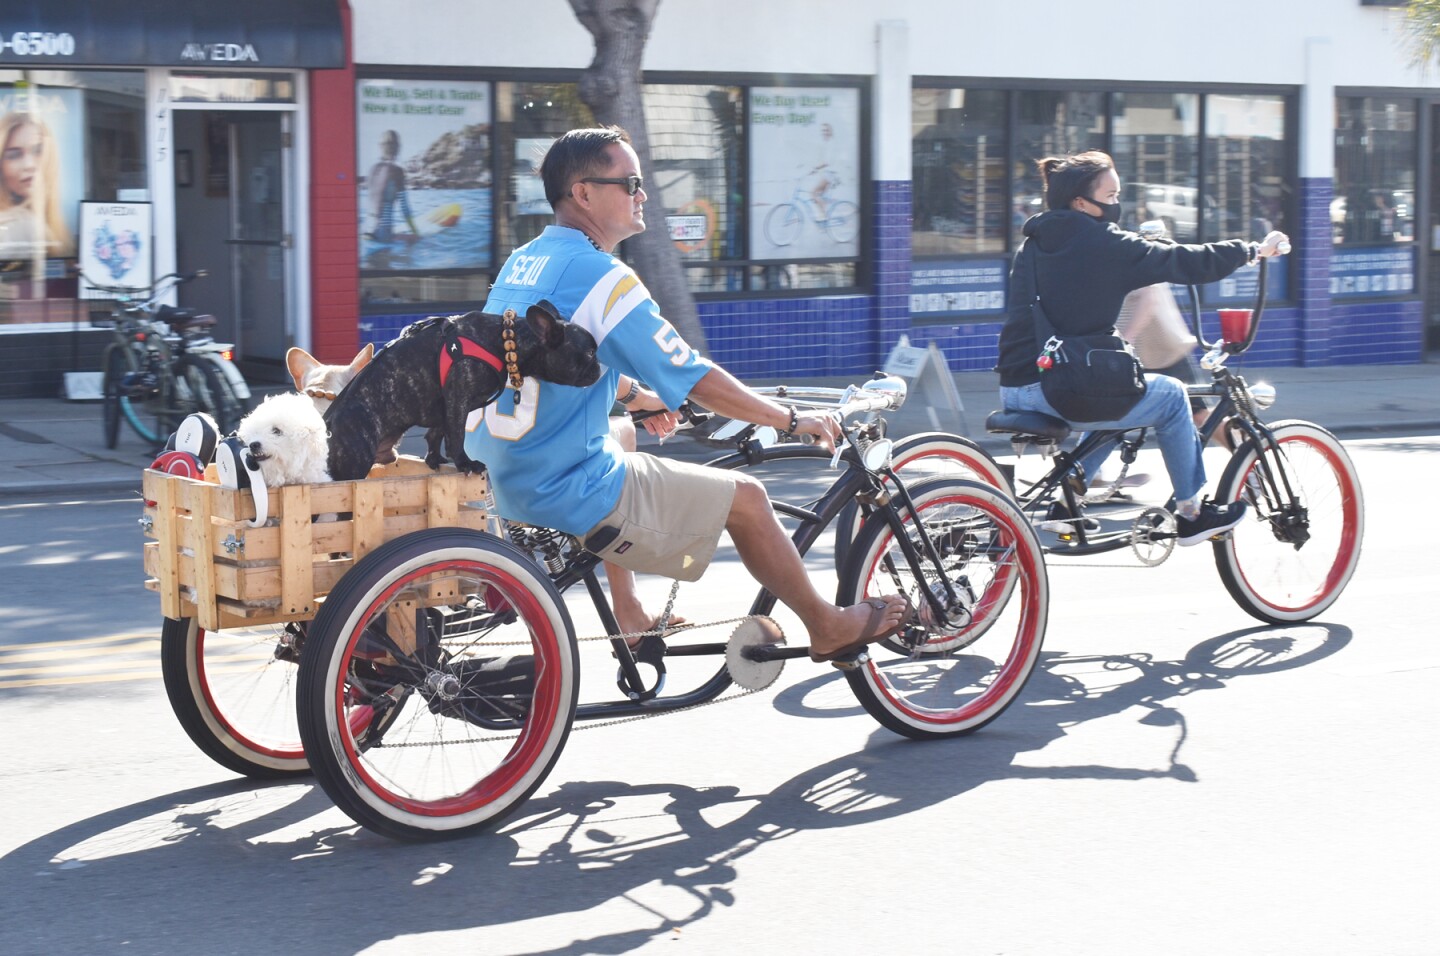 Three dogs were given a ride in a basket attached to a bicycle.